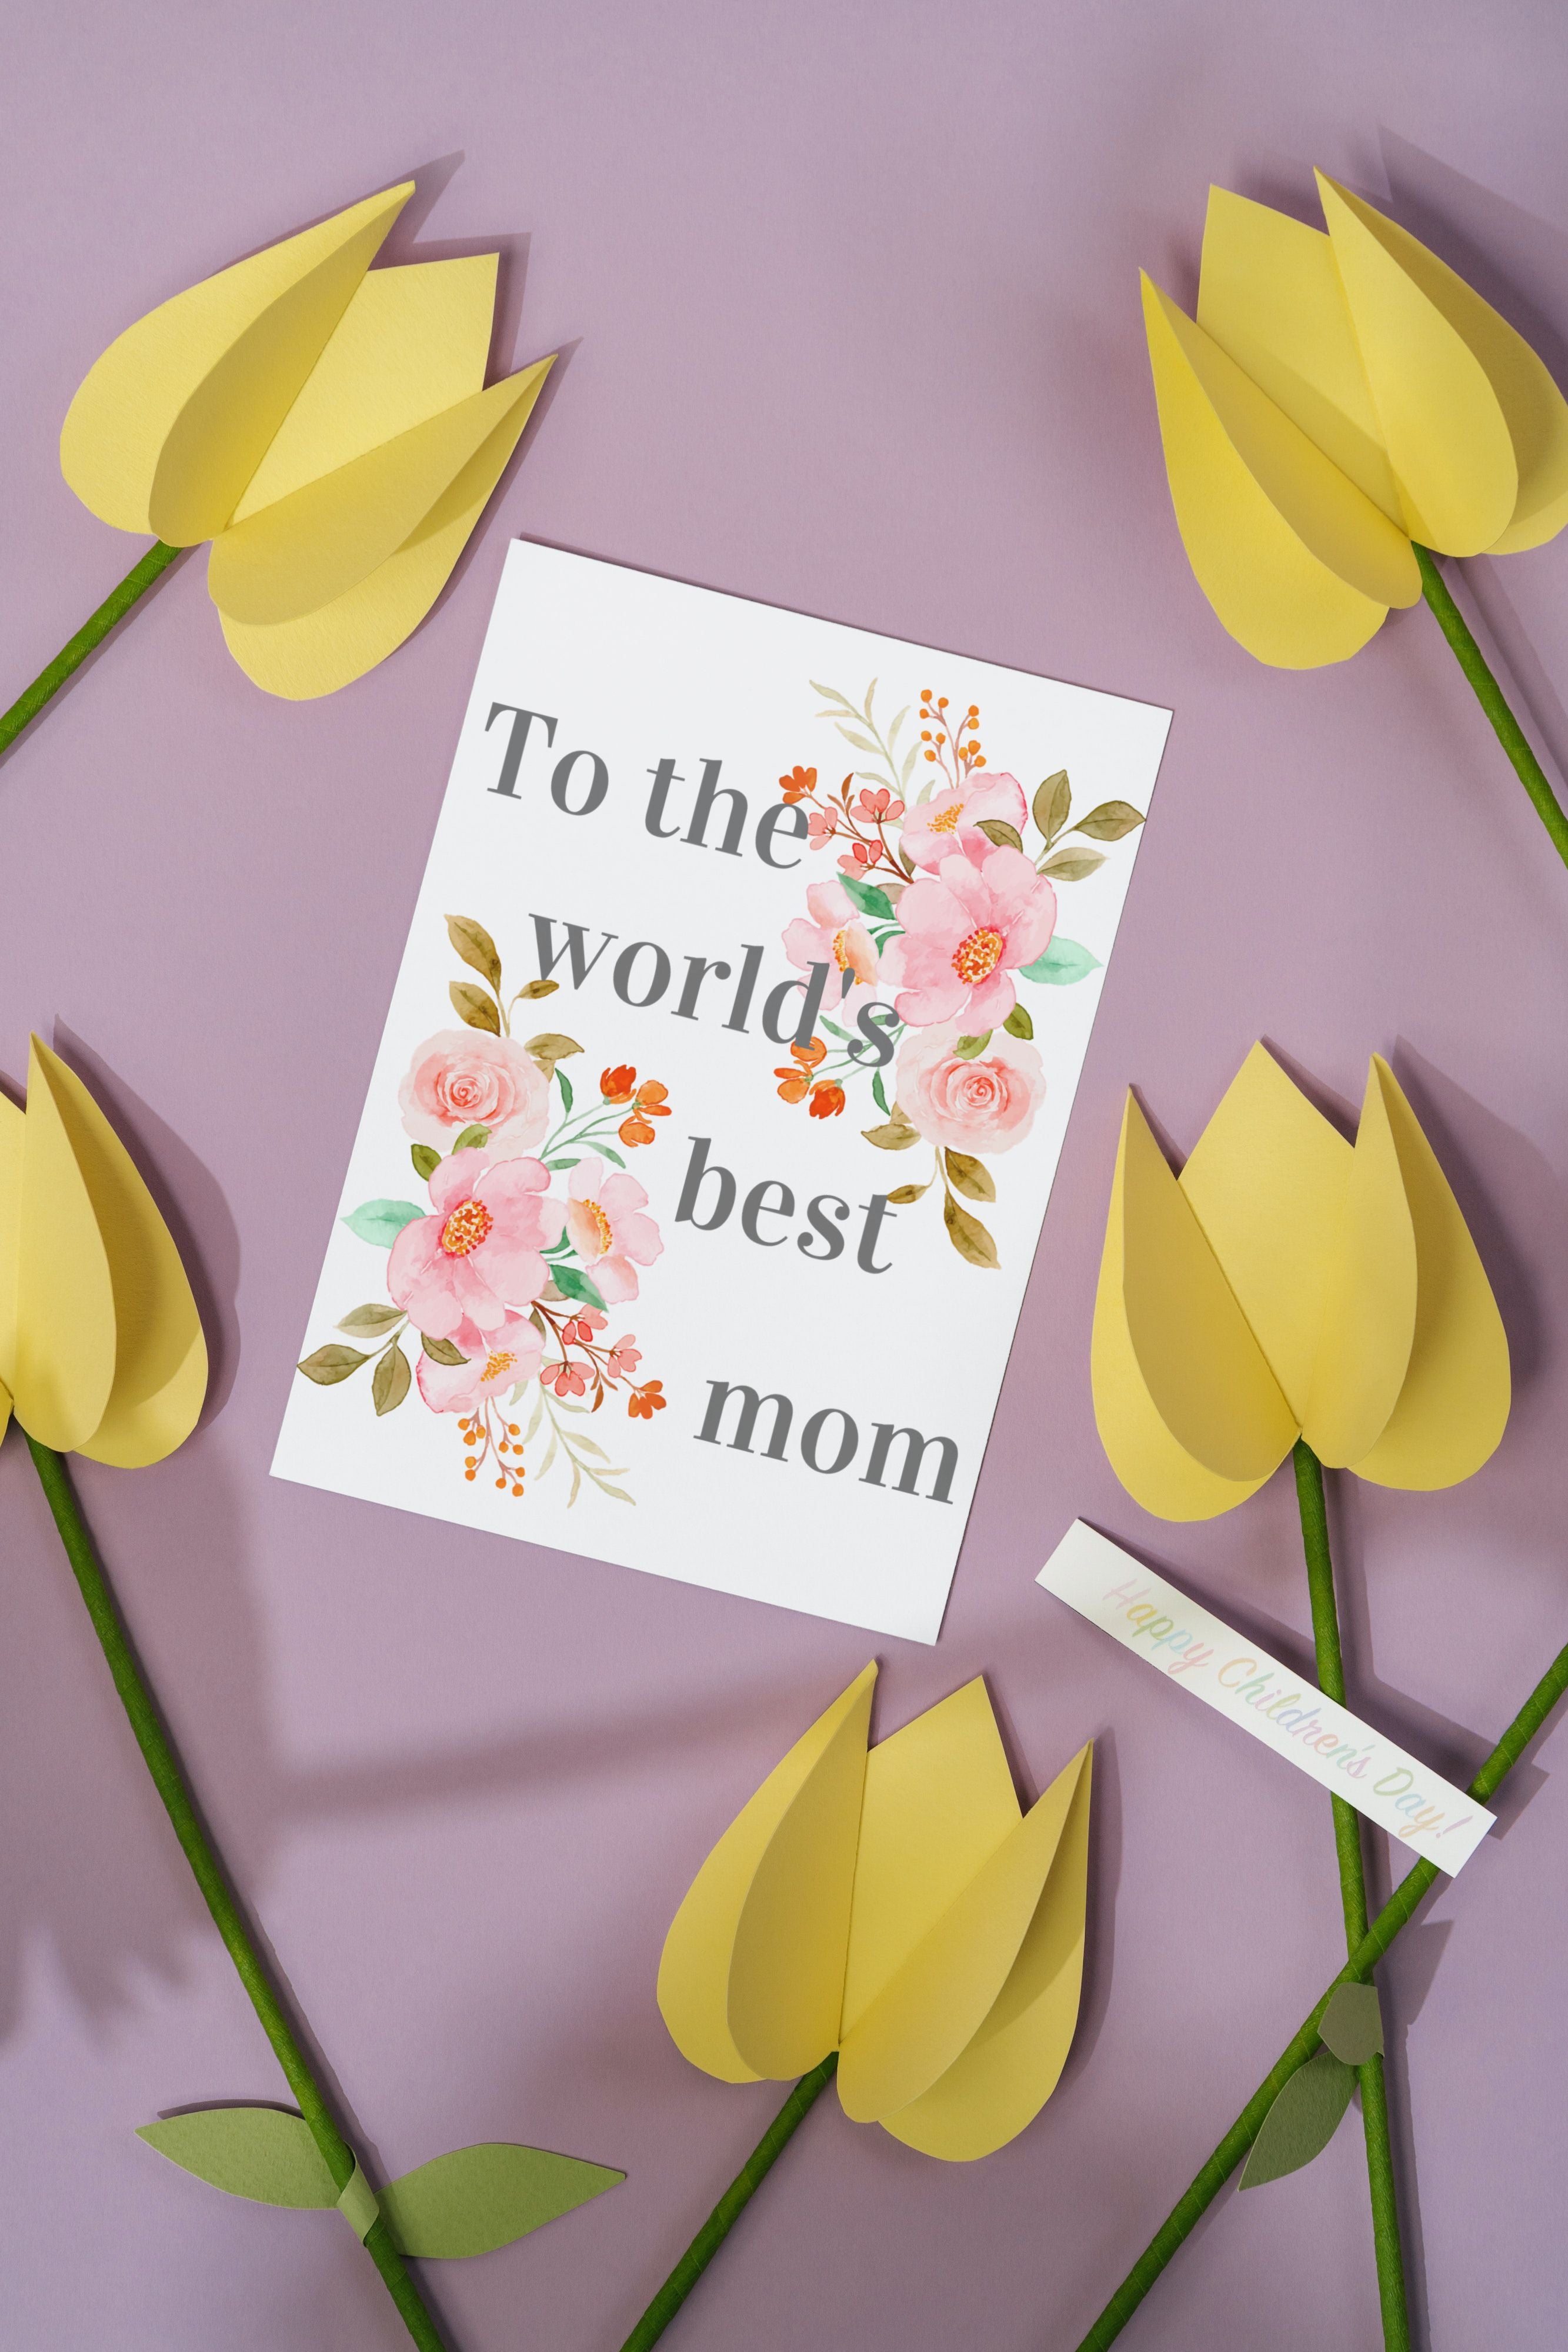 Floral card saying To the world's best mom surrounded by paper flowers.